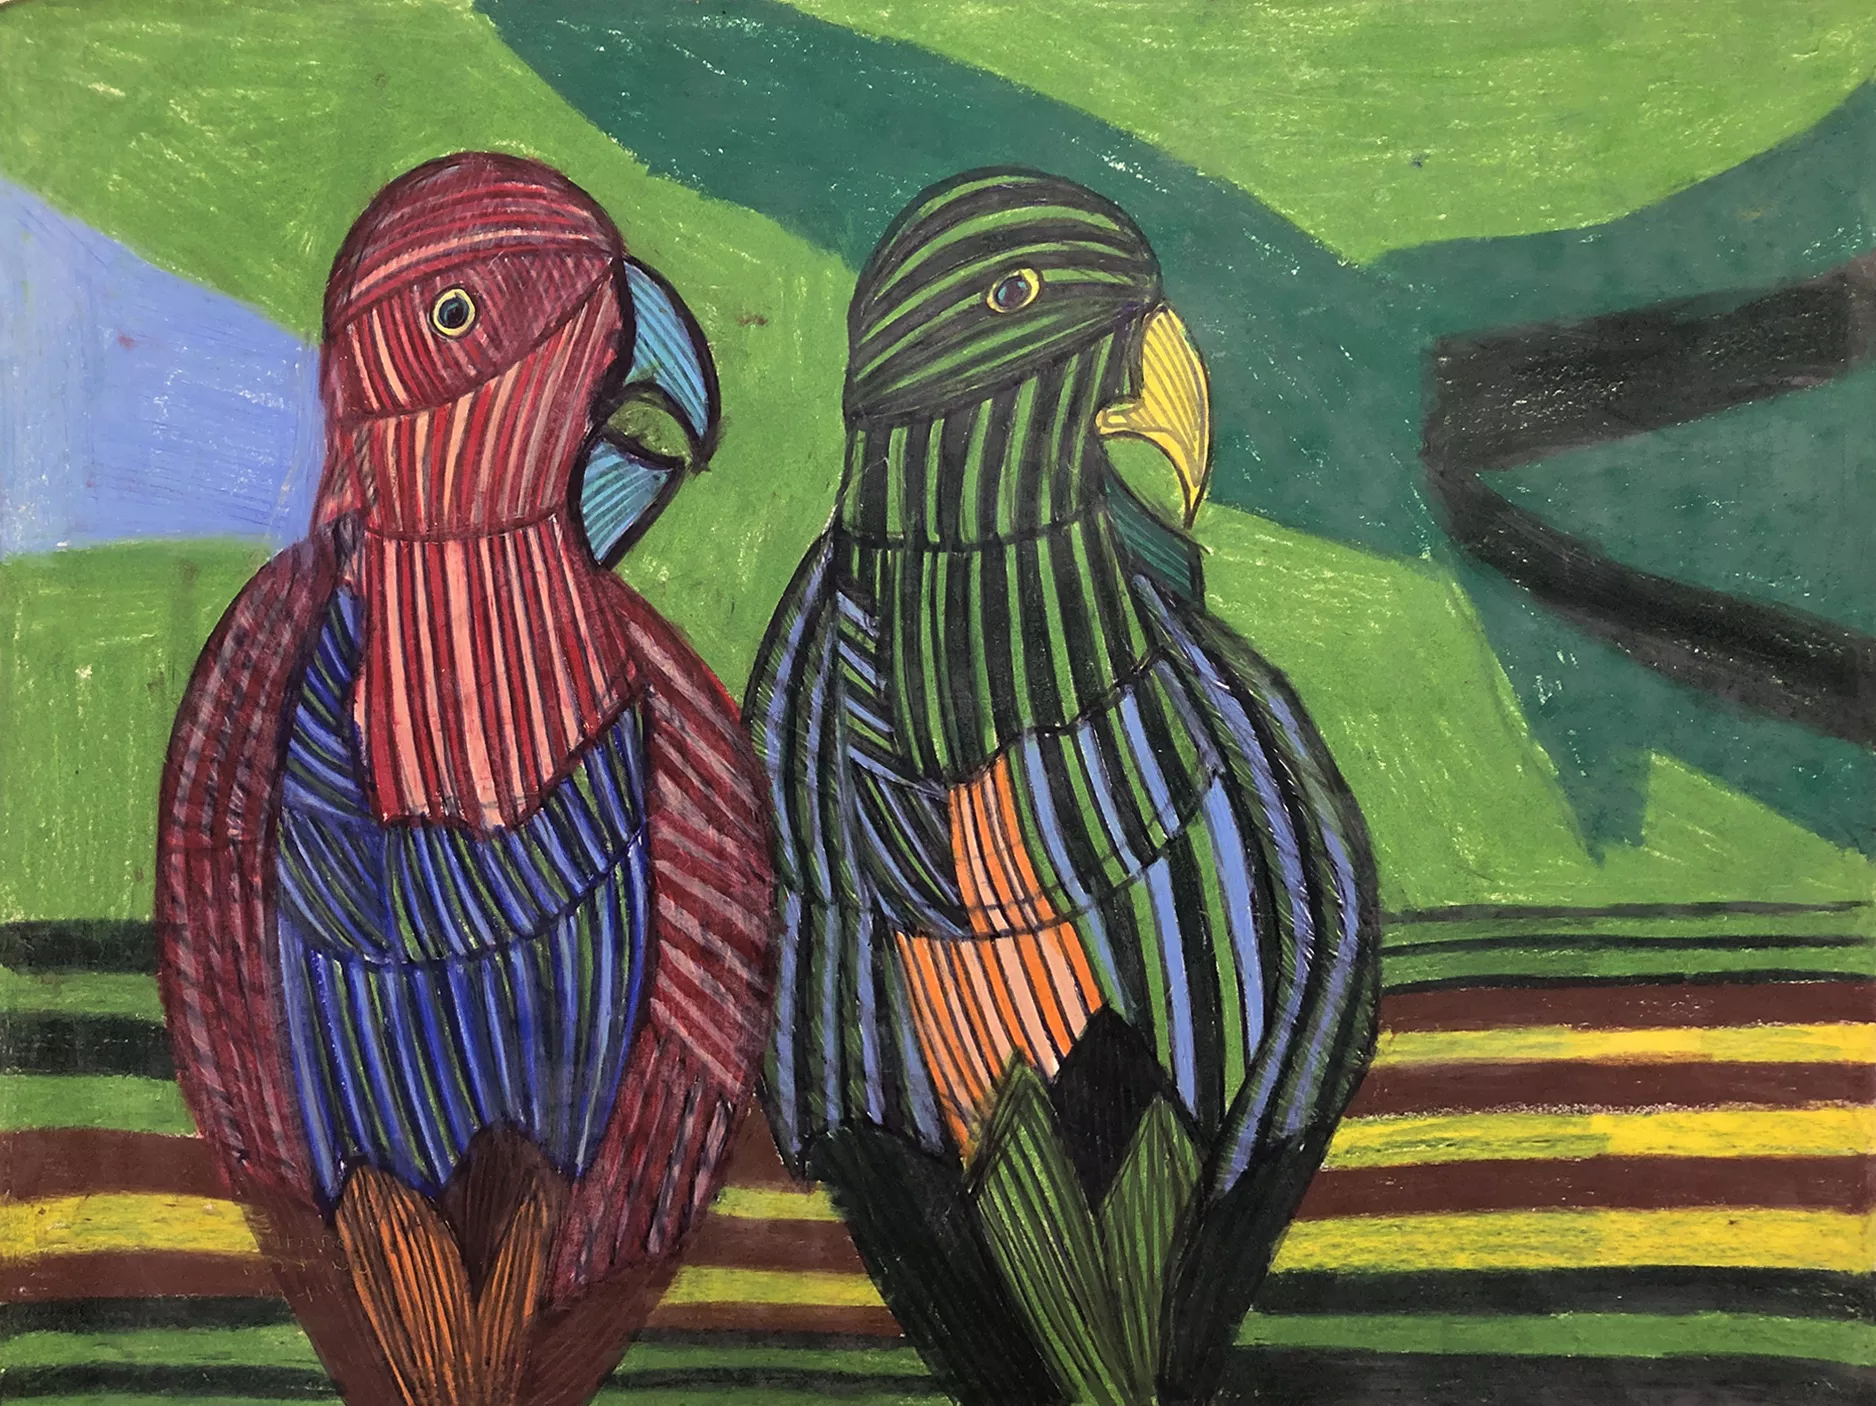 Jonathan Jackson Birds, 2019 This image features two birds sitting side by side. Their heads are turned in profile and their bodies are indicated in sections of striped bands and various colors, including oranges, reds, blues and greens. Against the broad shapes of the background the birds make a striking impression.  Colored pencil and marker on paper, 18” x 24”